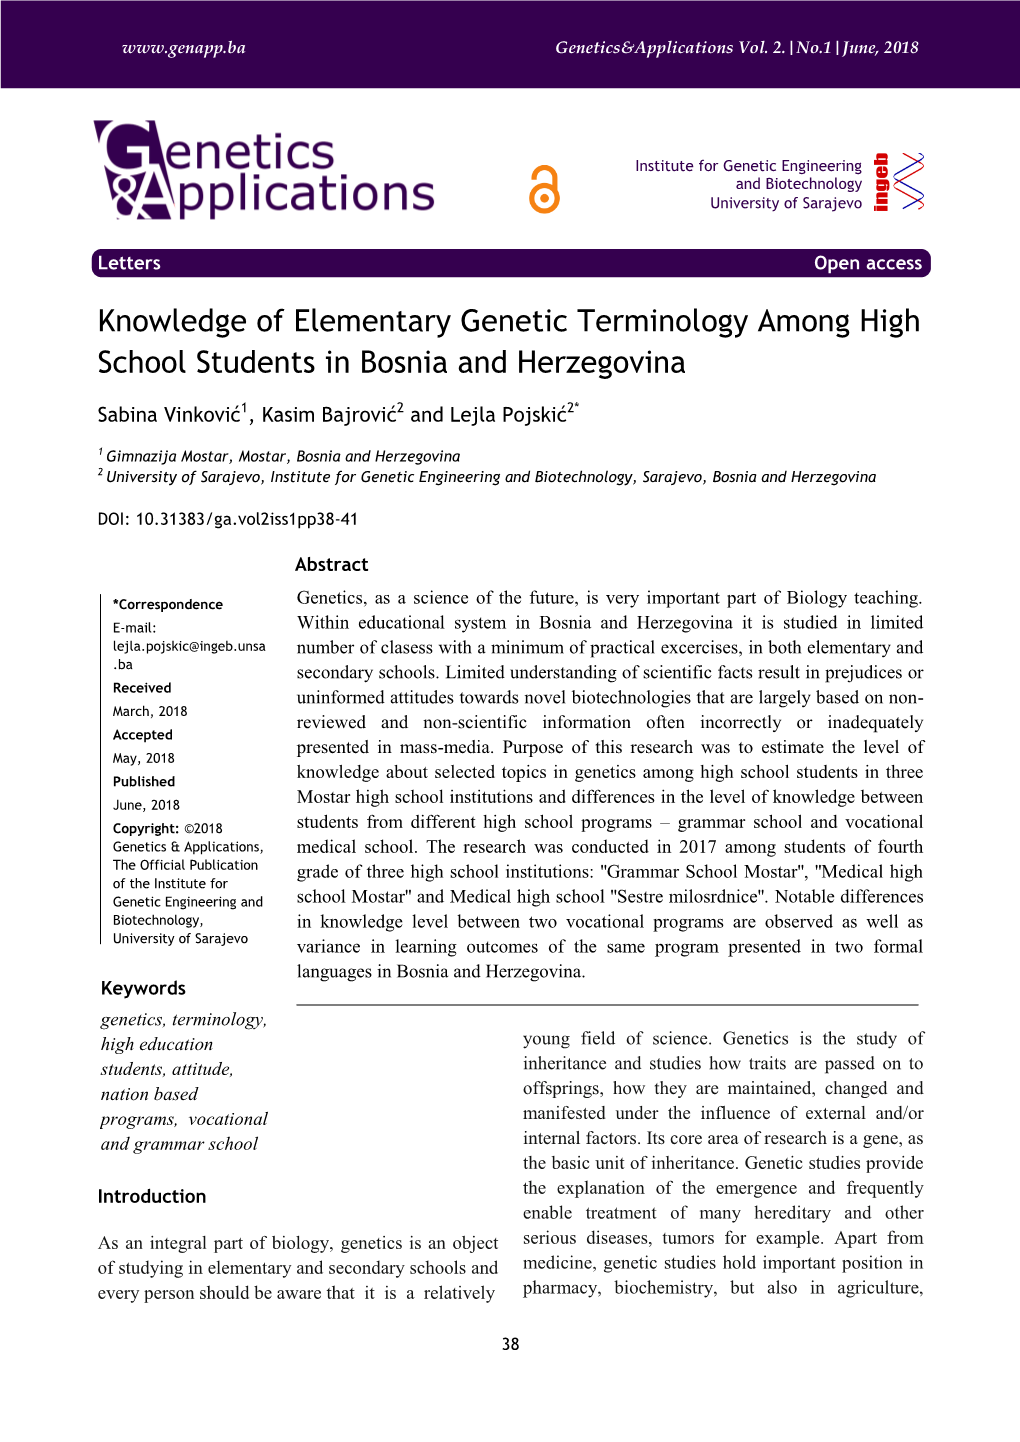 Knowledge of Elementary Genetic Terminology Among High School Students in Bosnia and Herzegovina